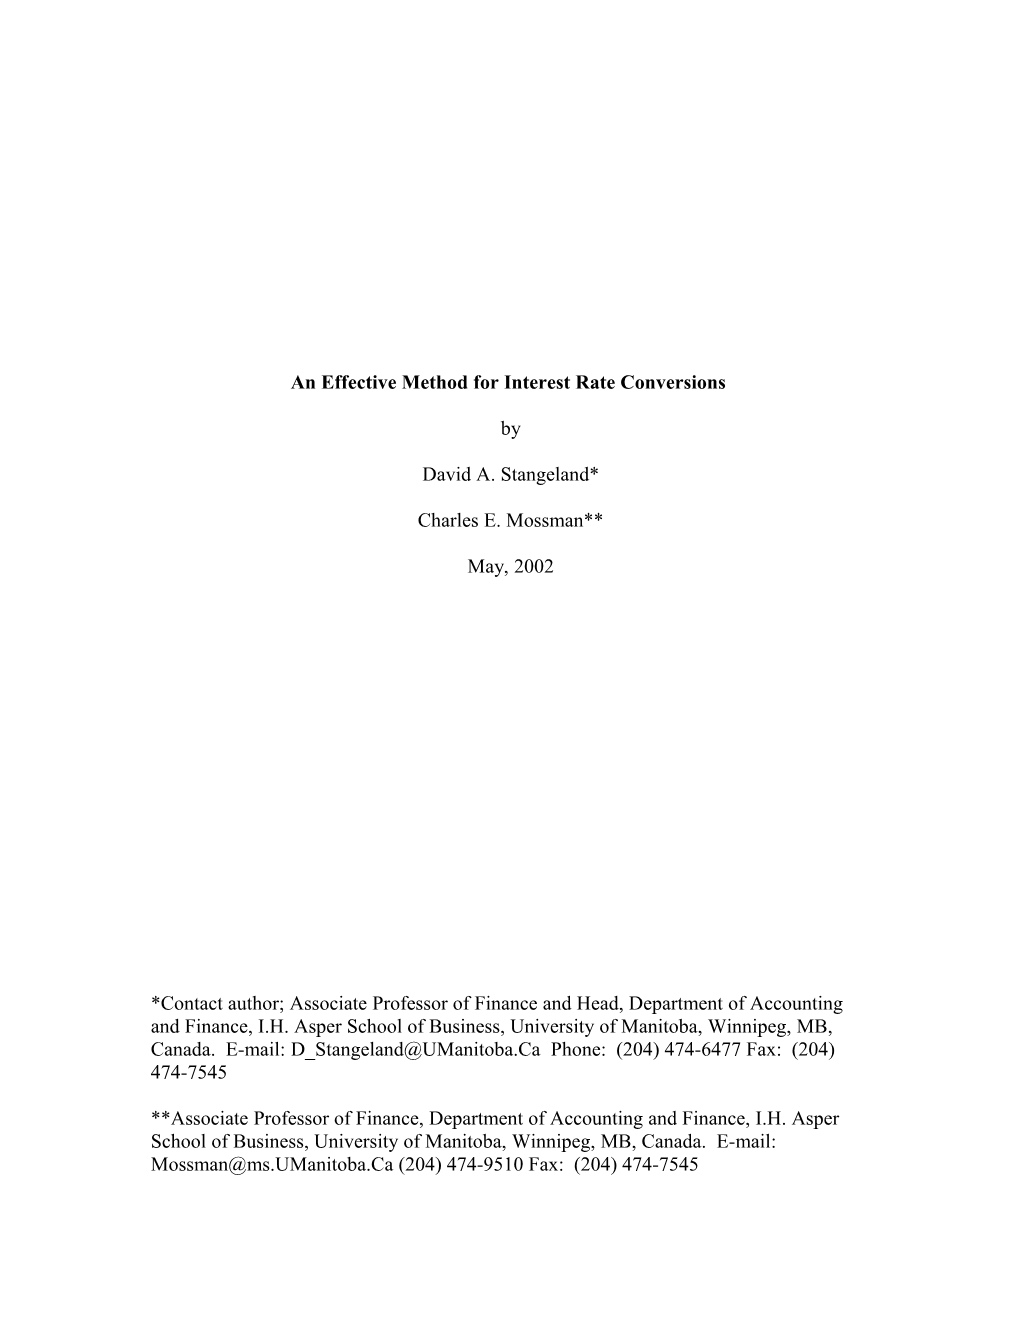 An Effective Method for Teaching and Understanding Interest Rate Conversions